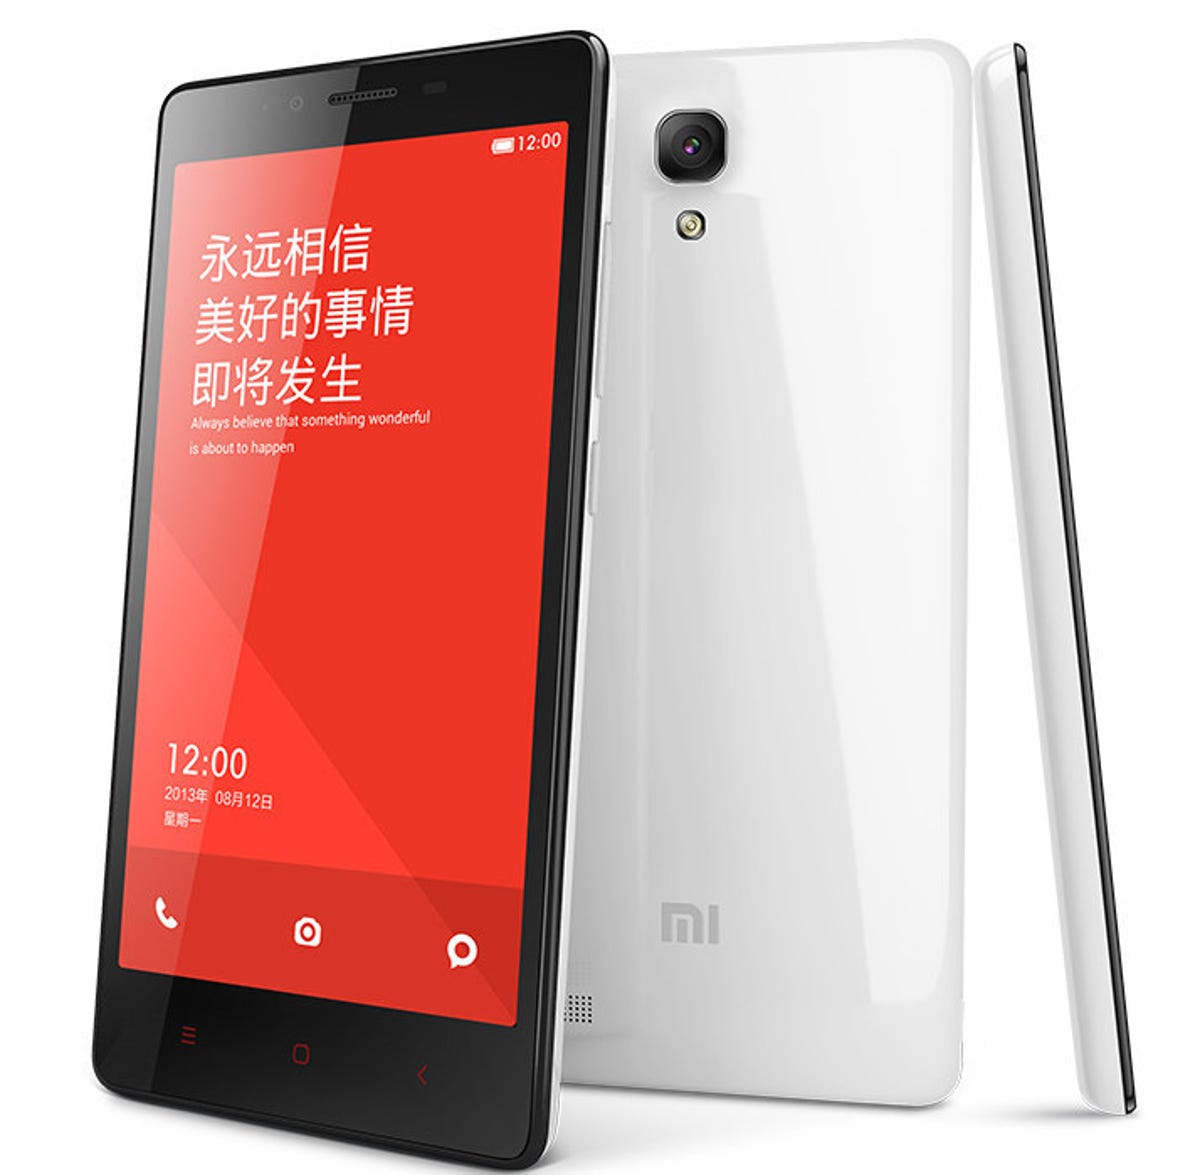 Xiaomi Redmi 2 review: Value, but not without cost - CNET